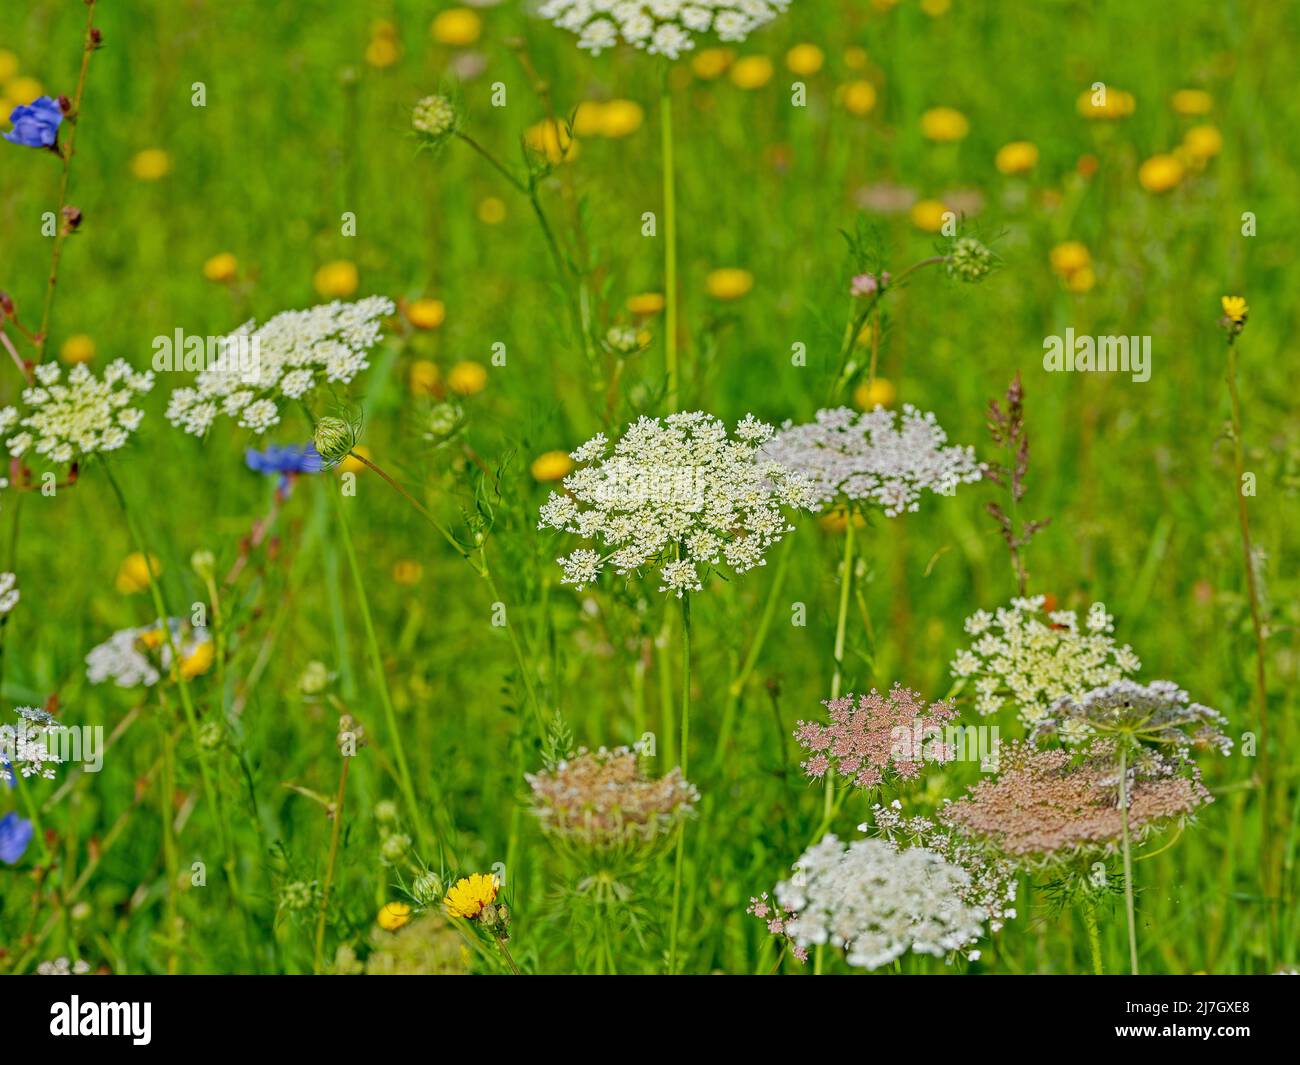 Wildflower meadow with wild carrot and hawkweed Stock Photo